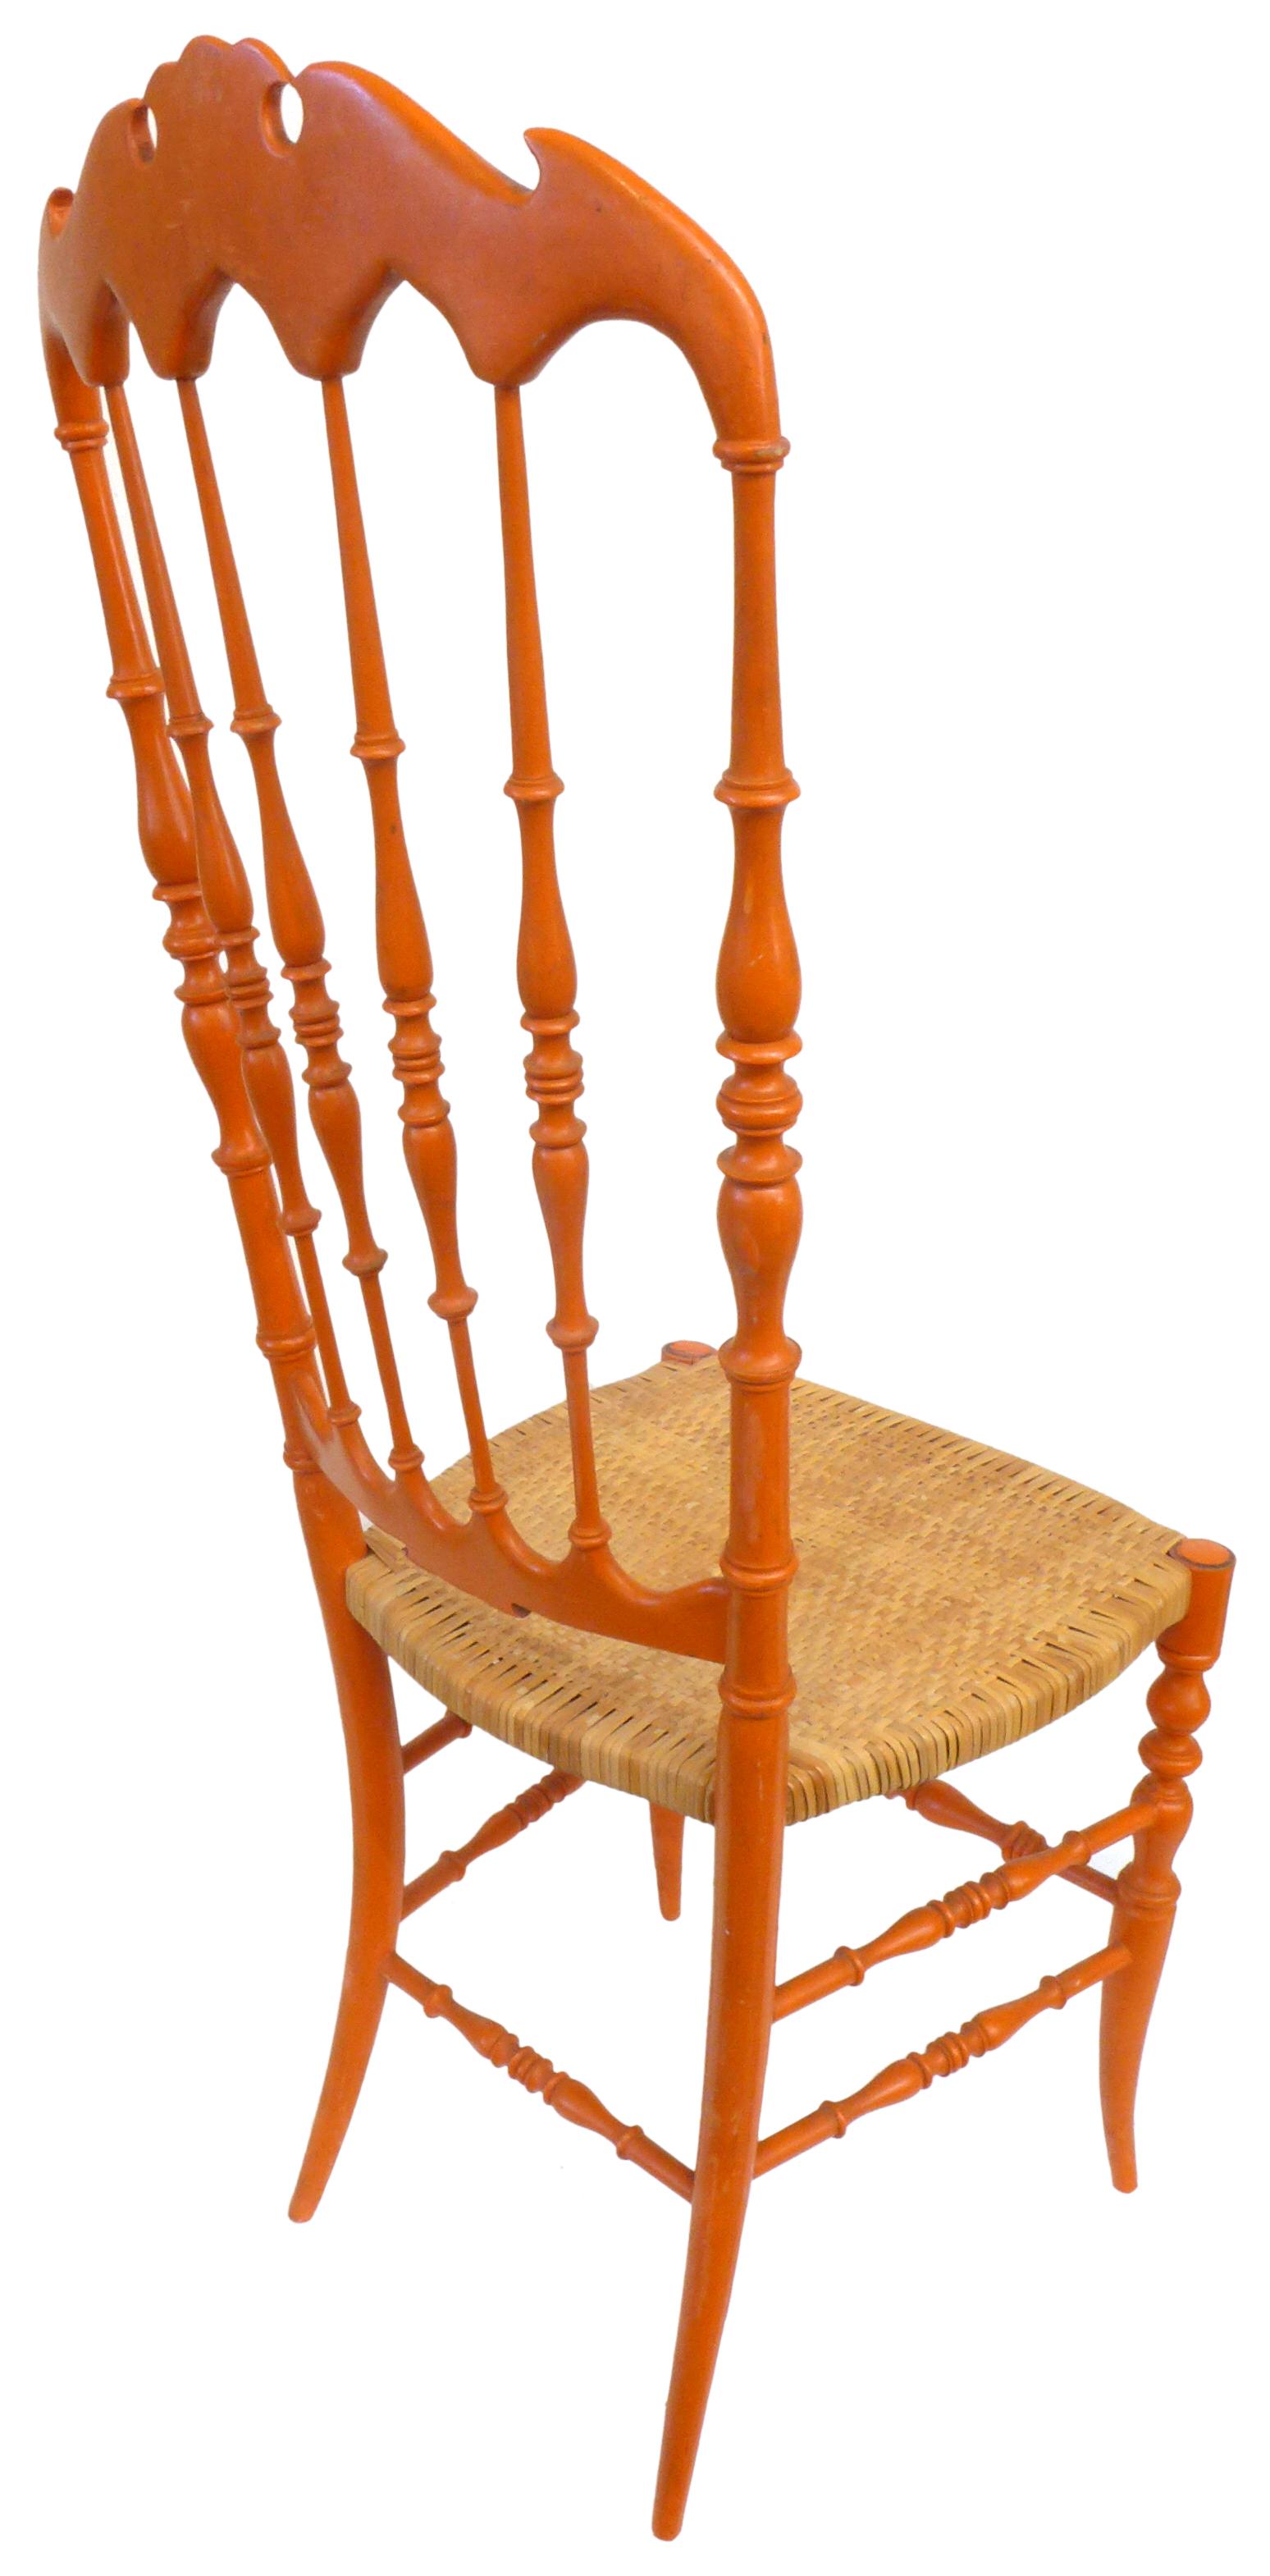 Mid-20th Century Set of 4 Italian Painted Wood & Woven Cane Chiavari Chairs For Sale